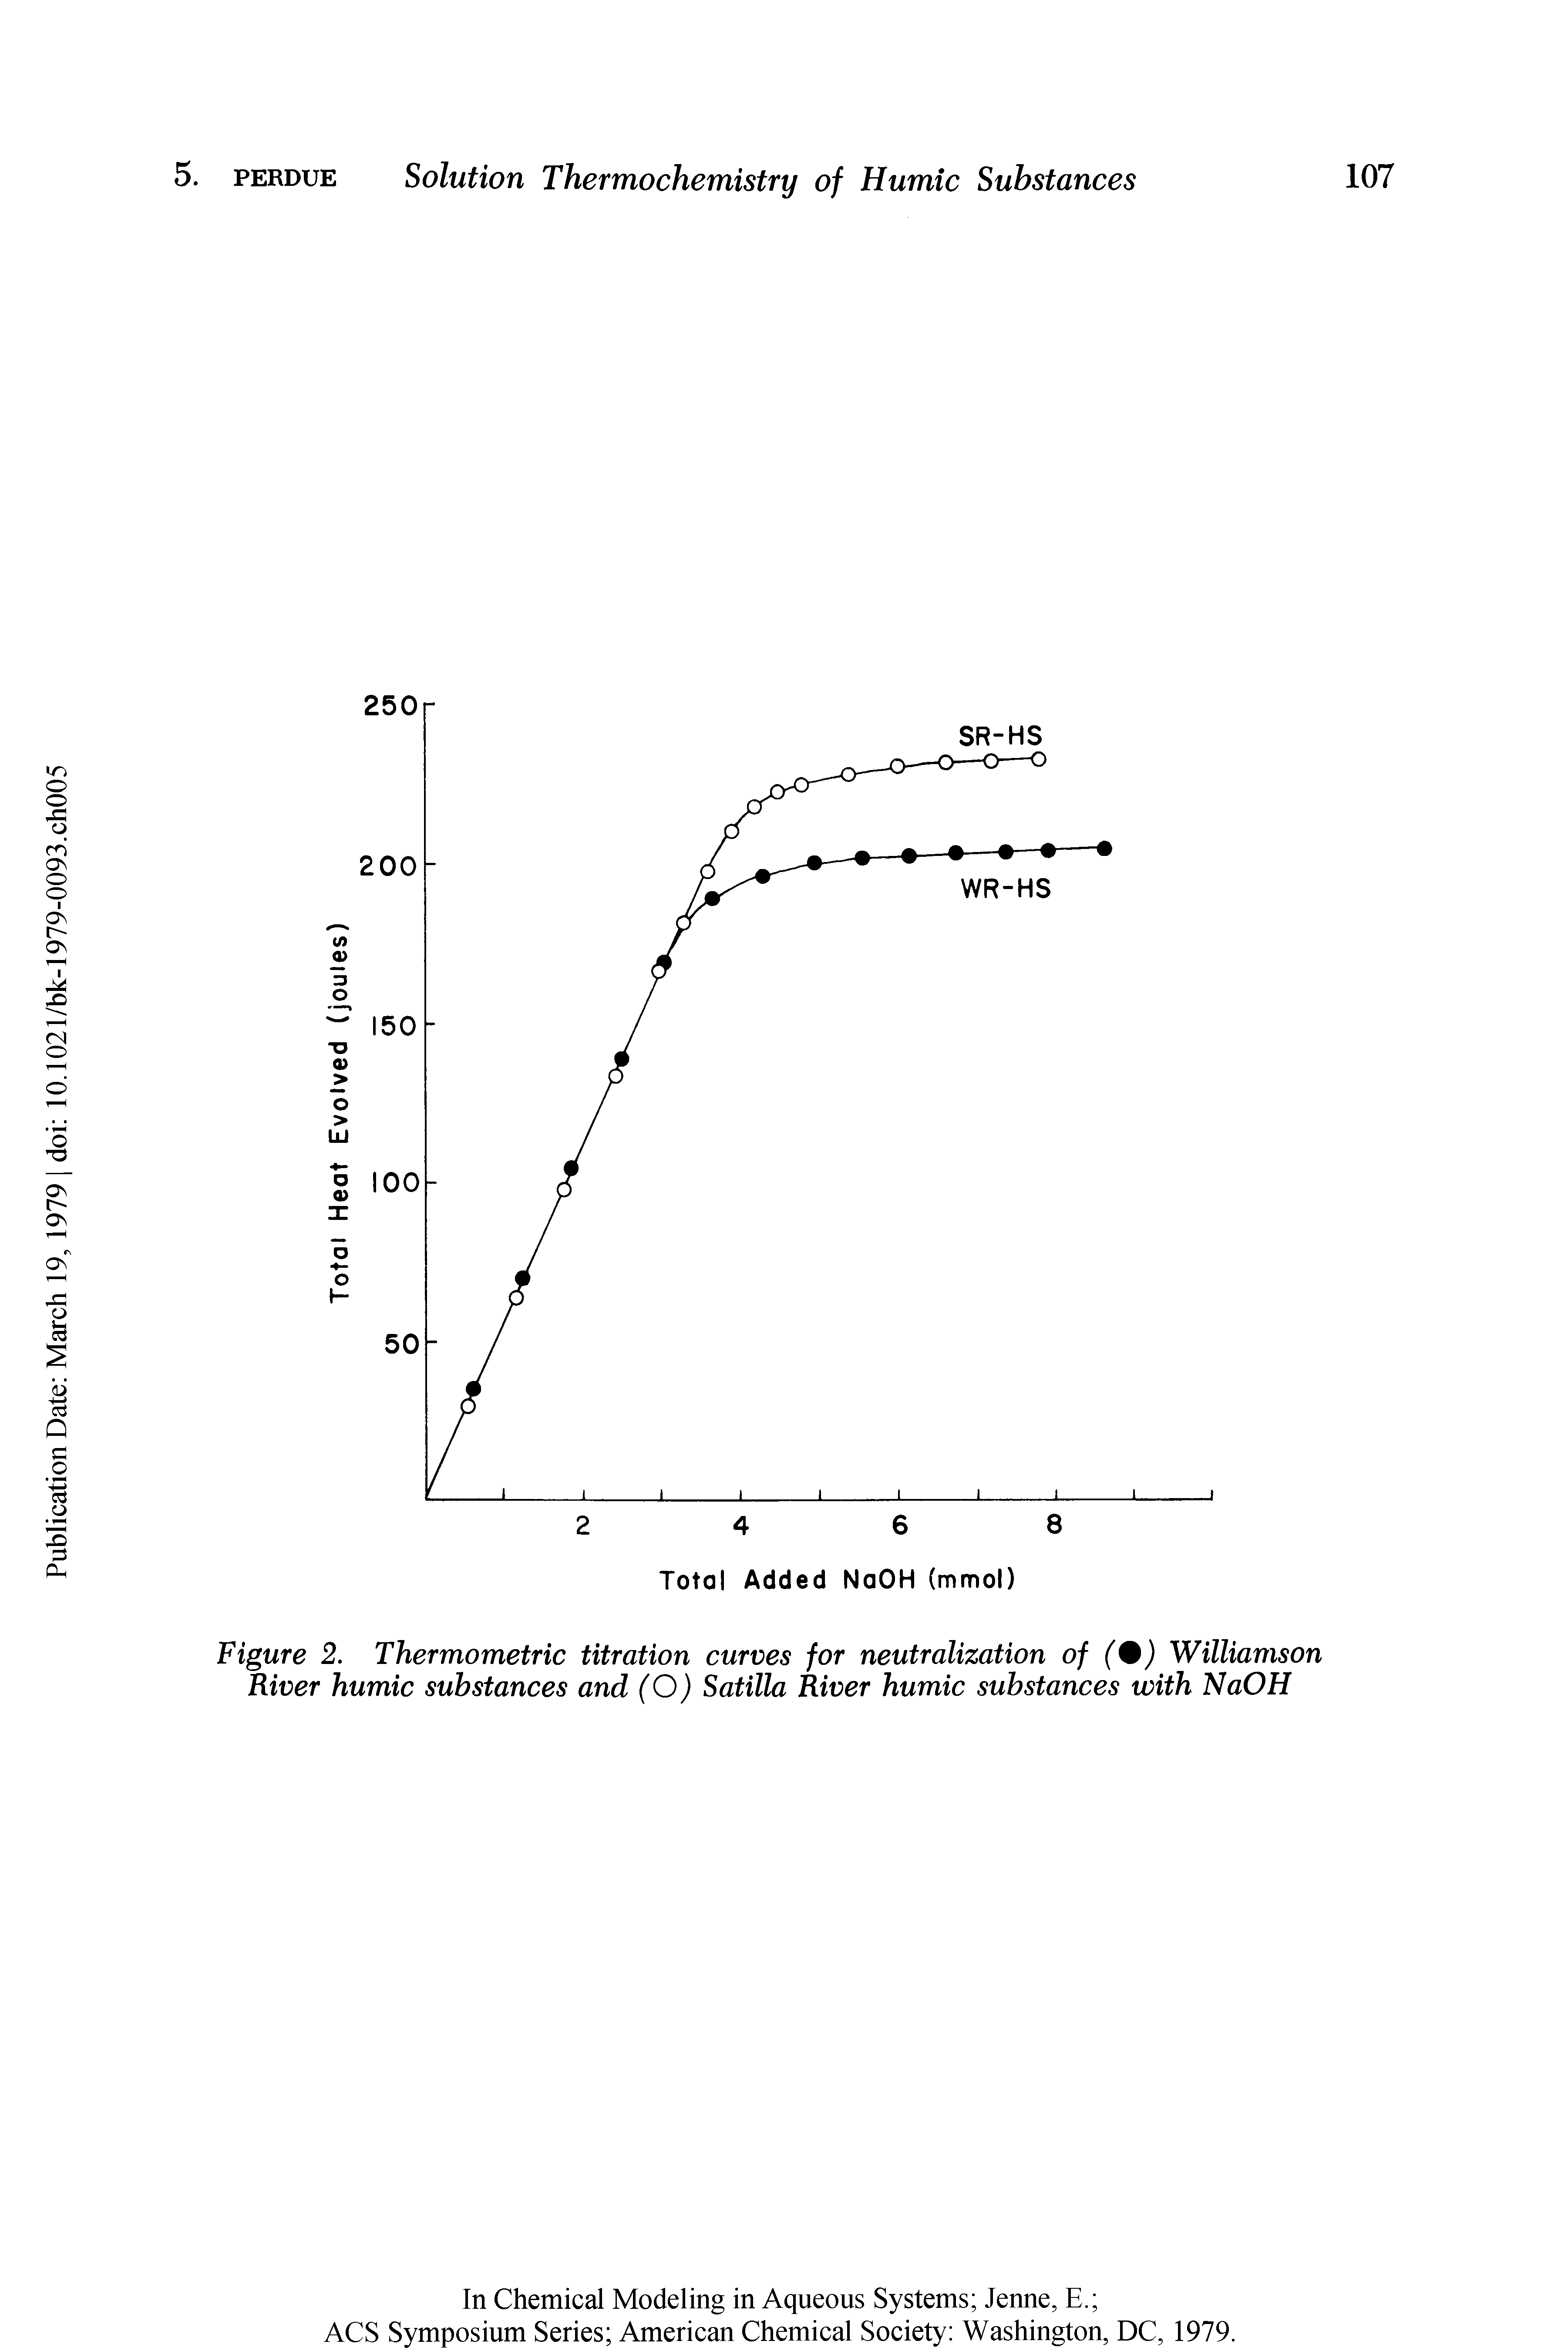 Figure 2. Thermometric titration curves for neutralization of (%) Williamson River humic substances and (O) Satilla River humic substances with NaOH...